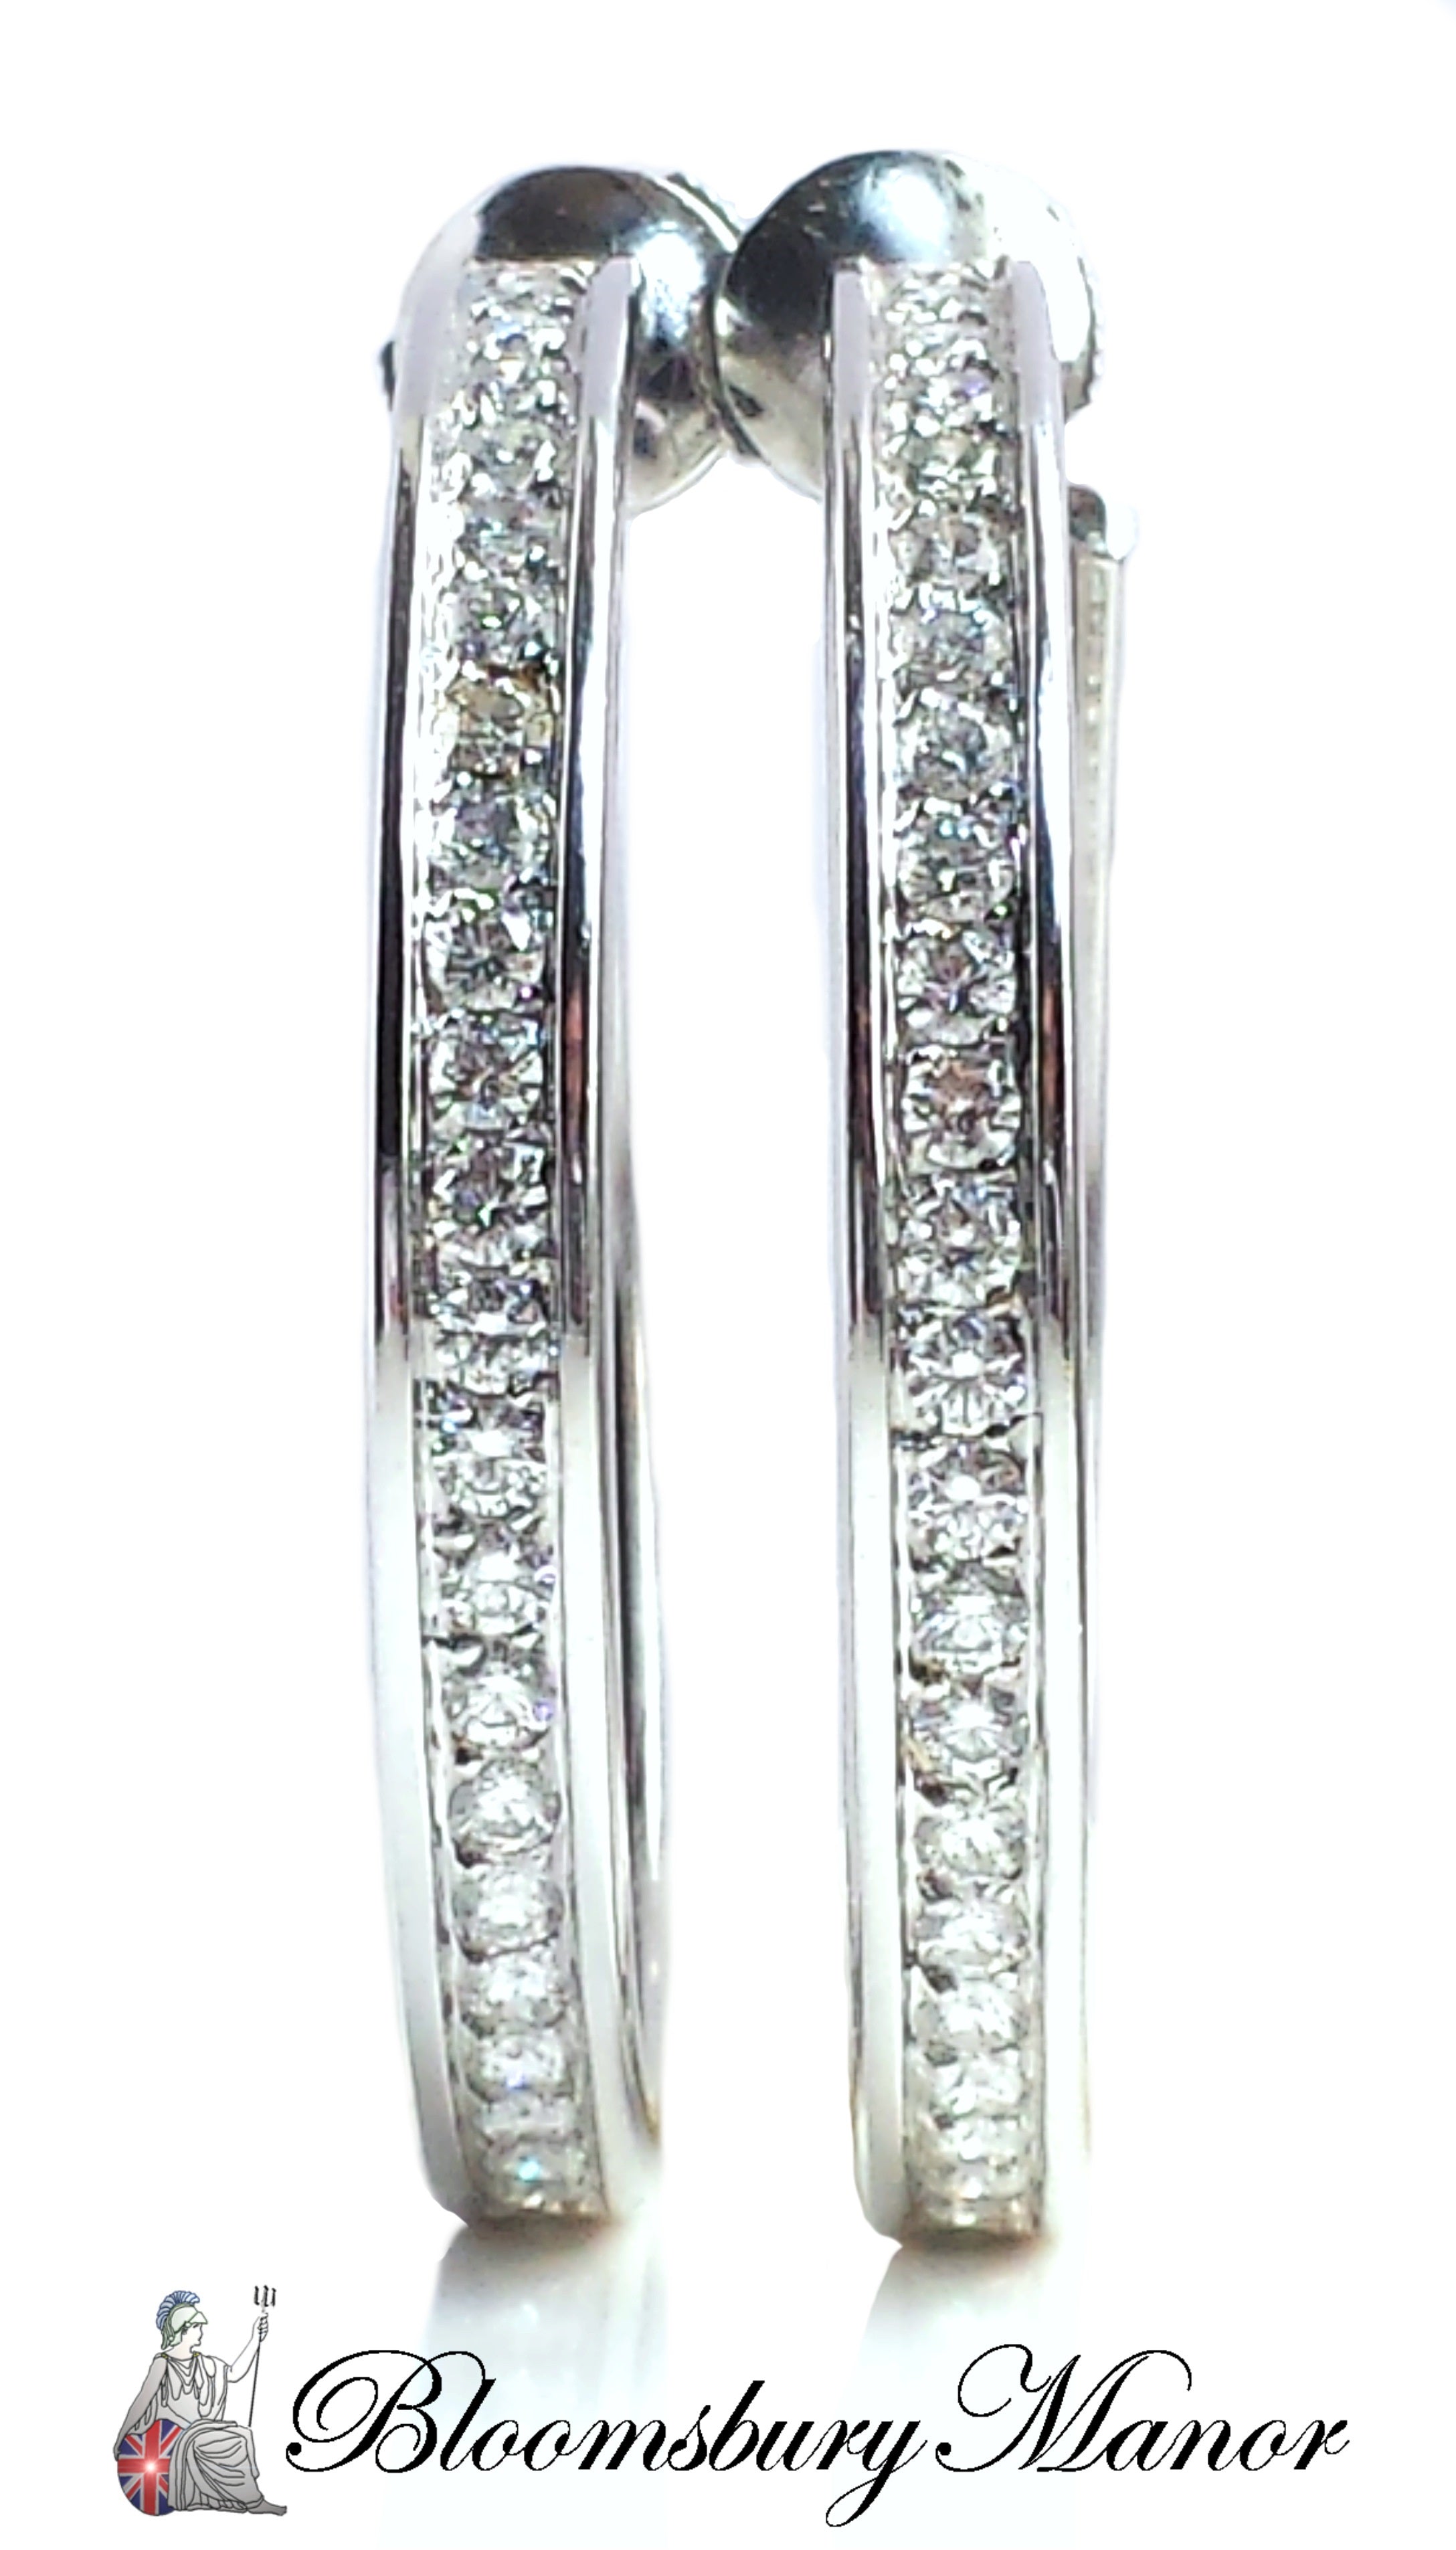 pre-owned, second hand, used, Cartier Diamond Earrings